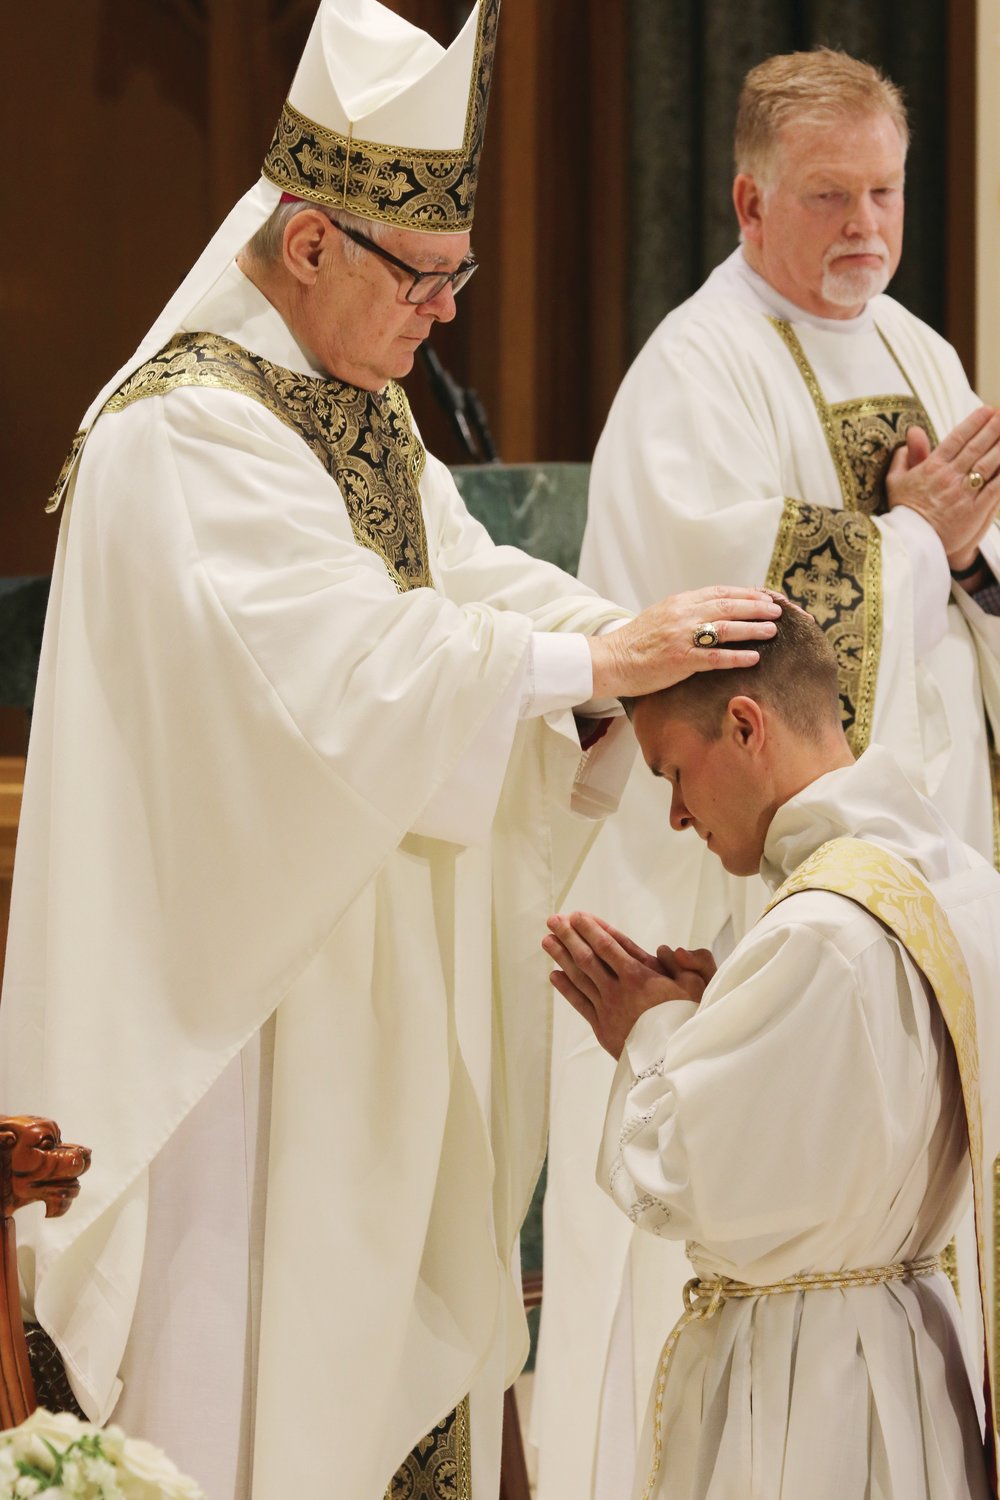 Bishop Thomas J. Tobin lays his hands upon the head of the elect.